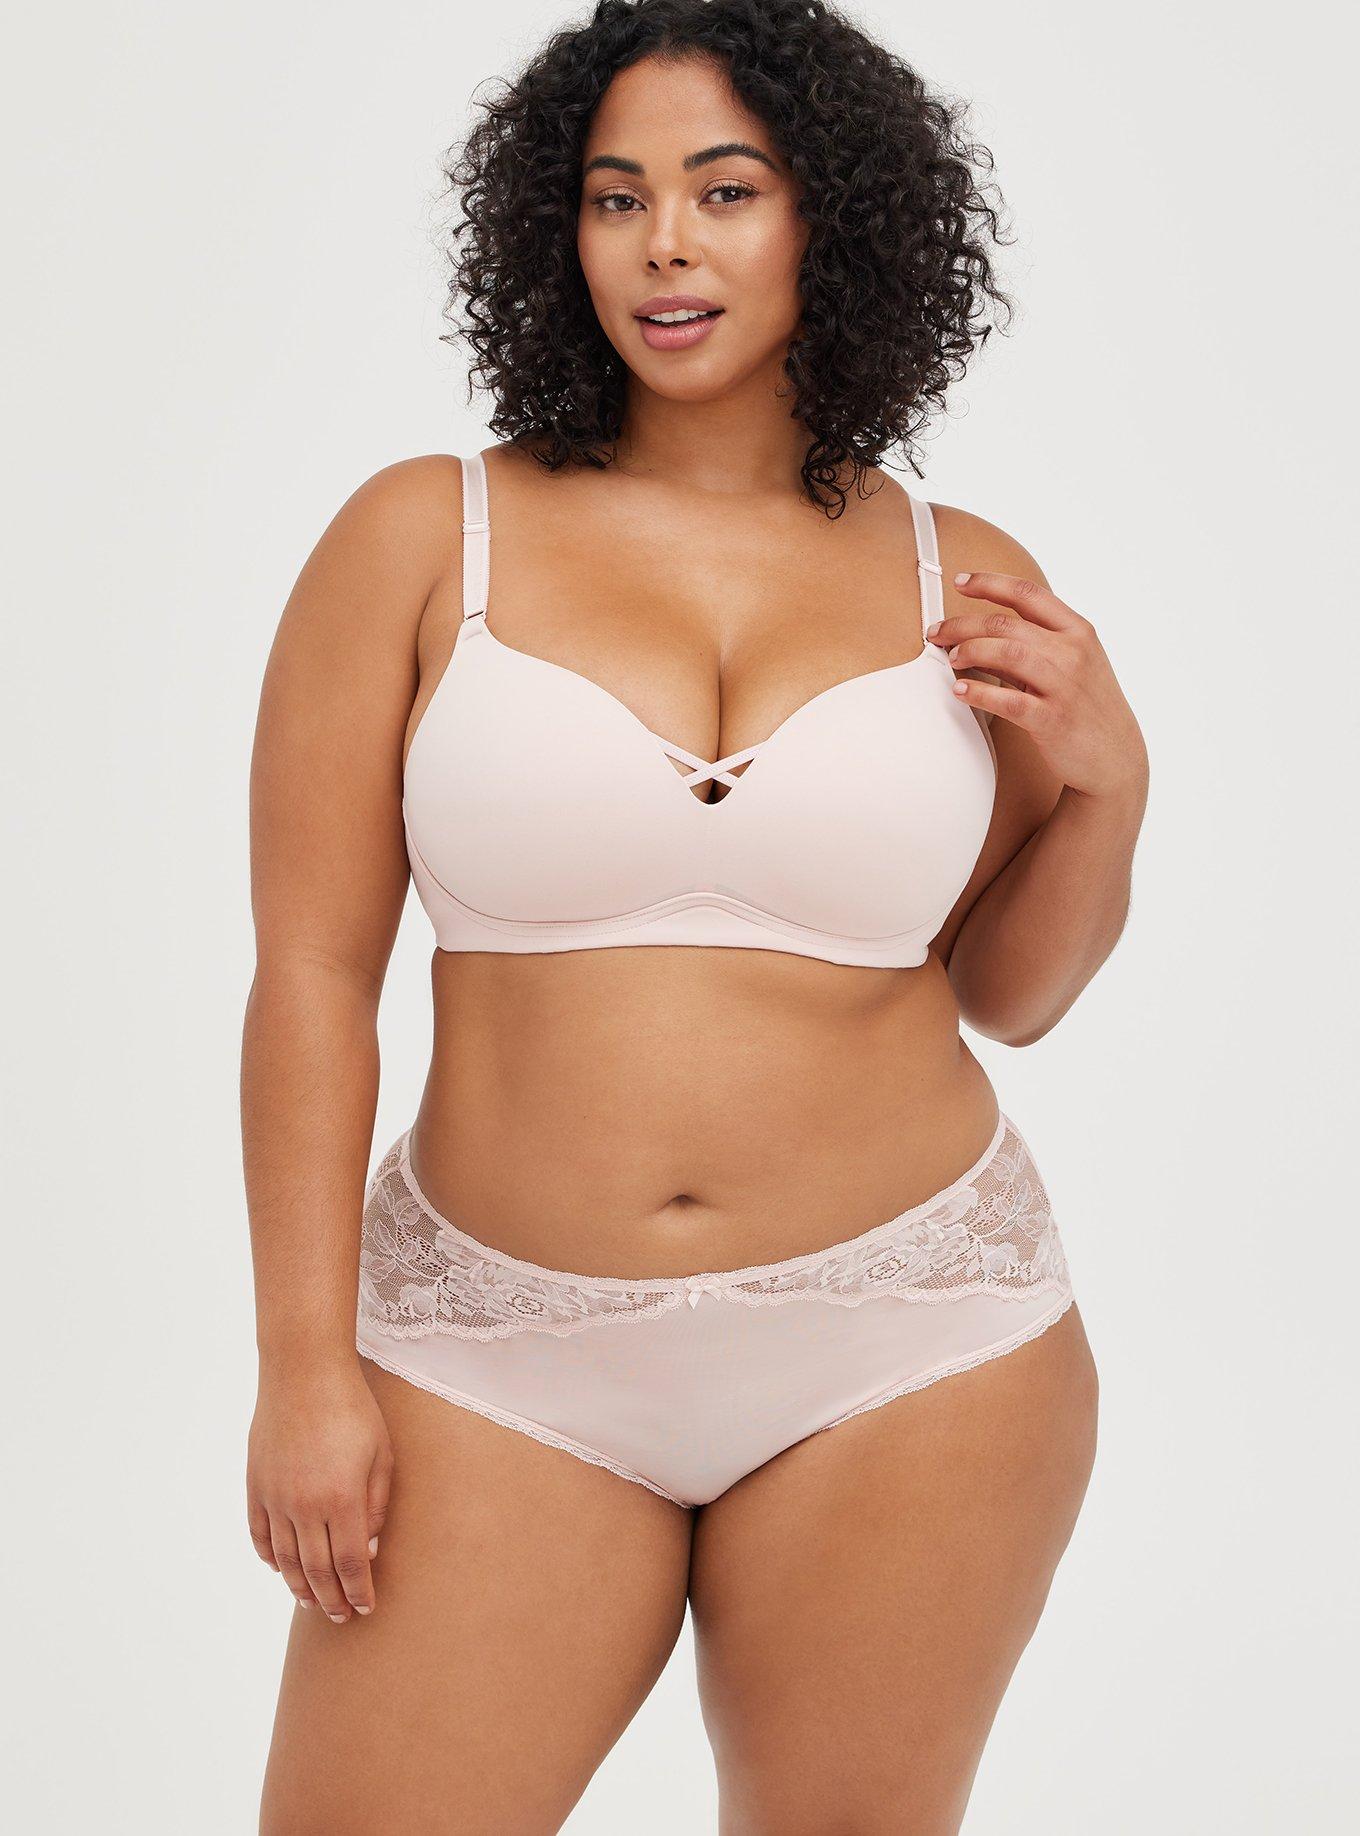 I've got huge 44M boobs - they're saggy, heavy & I thought I'd never find a  bra to help then a brand changed my life